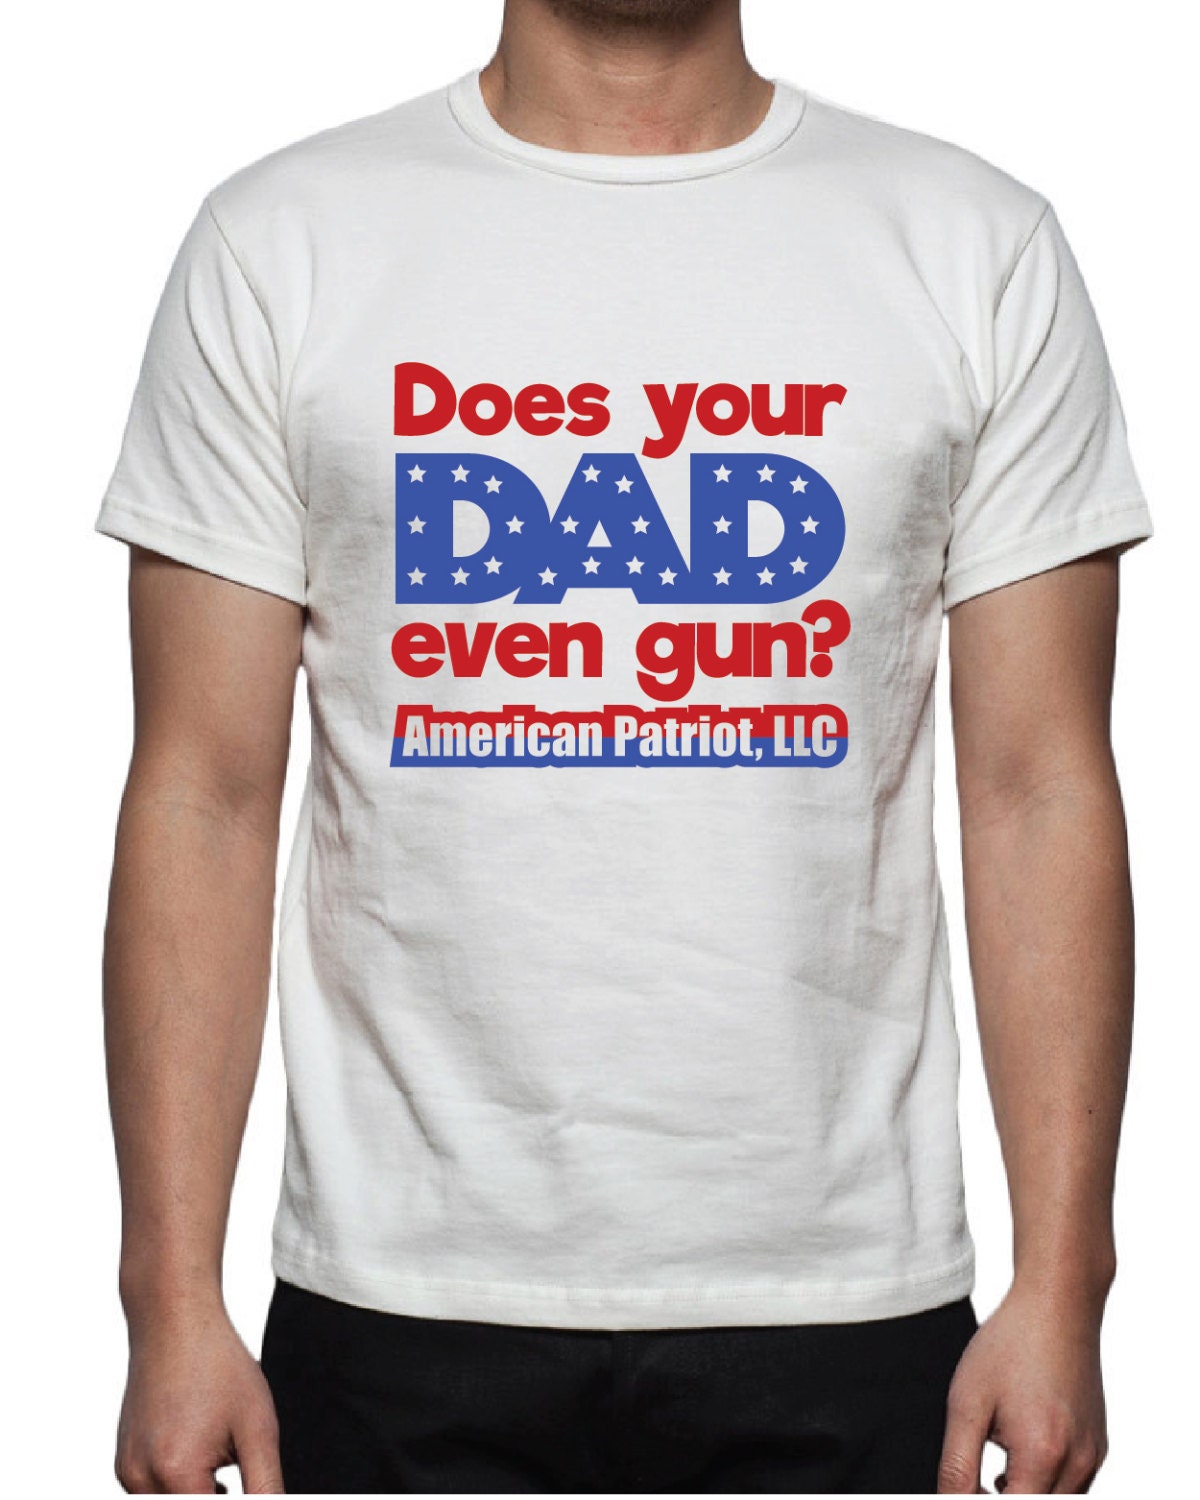 Download American Patriot Tee Shirt Design SVG DXF EPS Vector files